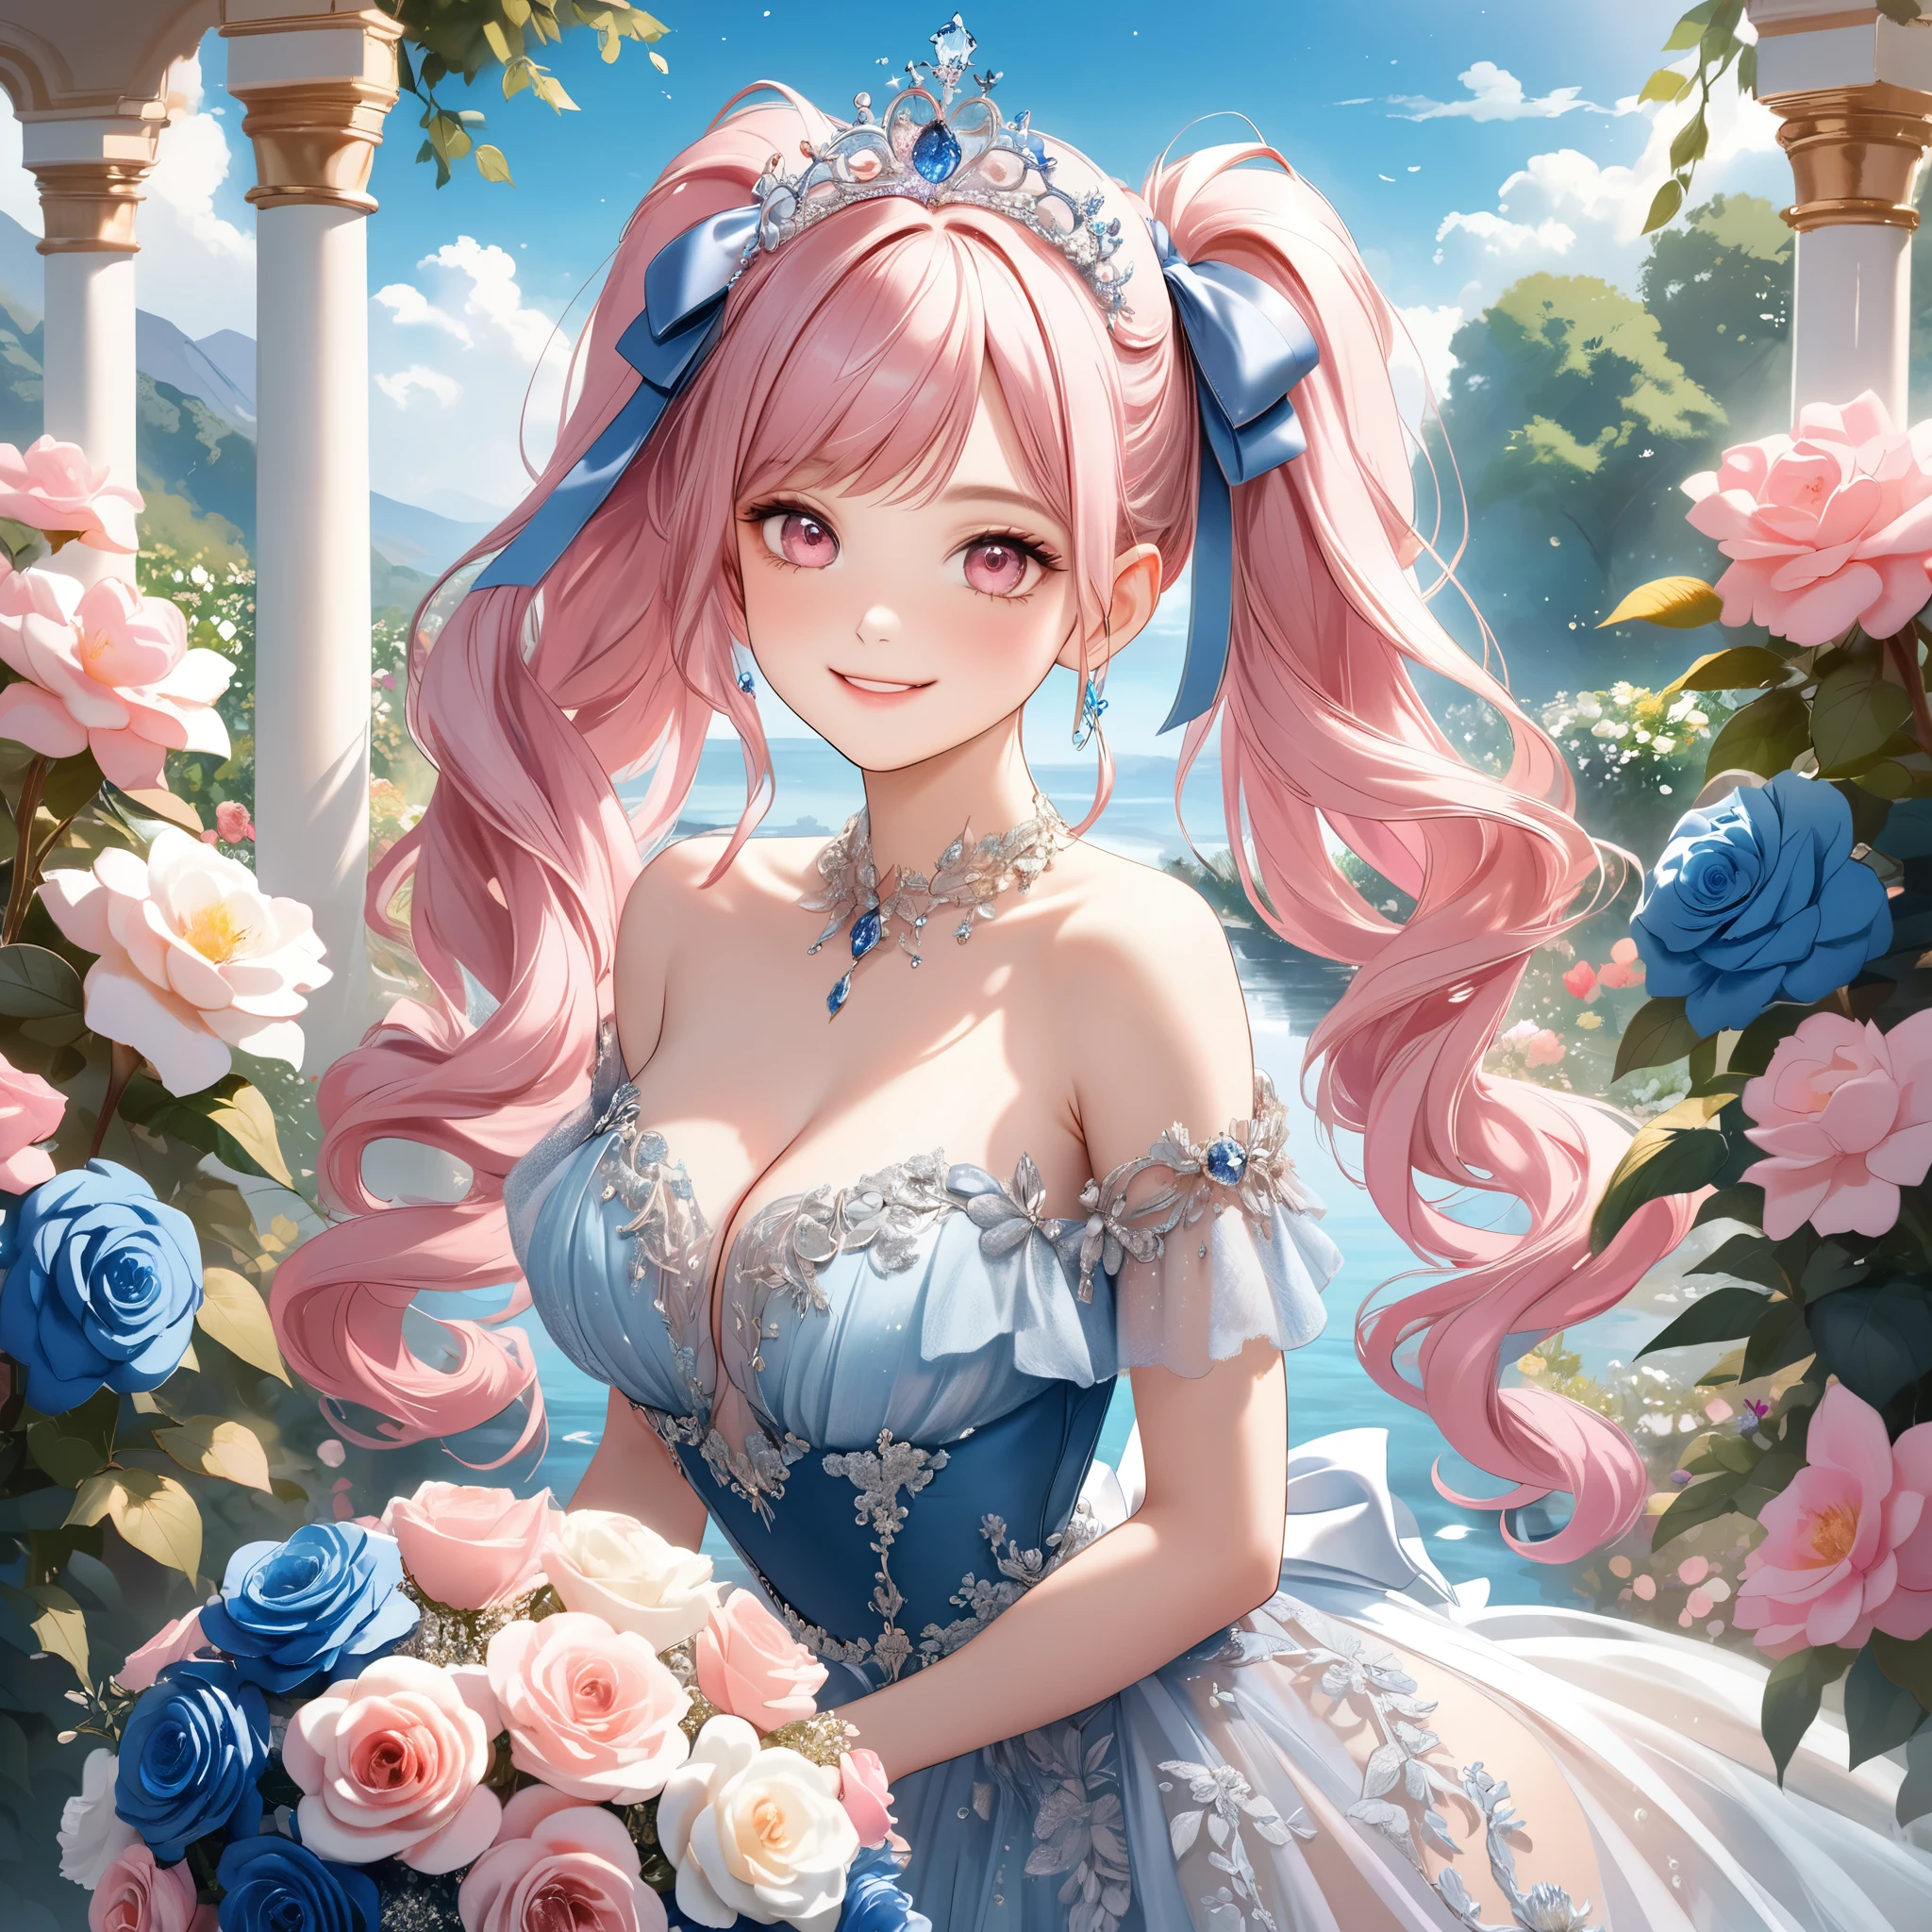 (8K, masutepiece, Highest Quality, Best Quality, Official art, Breathtaking beauty and aesthetics, A highly detailed, The best masterpiece in history that exceeds limits, Breathtaking and beautiful lighting:1.2), (1 Beautiful Girl, Solo), (16 years old), (Beautiful detailed face), (shiny white skin), (Beautiful detailed pink twin tails hair, Bangs:1.5), (beautiful detailed adolable drooing pink eyes:1.5), break,
(Beautiful Luxurious blue Princess Dresses, blue See-through intricate lace, blue cute bow ribbon, a lot of see-through blue frill, sheer chiffon material, silver thread, Diamond, blue corset), (Beautiful Luxurious Diamonds Tiara), (Beautiful big bust:1.3), (happy smile, Beautiful smile, Gentle smile, cute smile, innocent smile:1.2), breathtaking scenery, Attractive, amazing, Beautiful, Elegant, Luxurious, magnifica, Eye-catching, the ultimate beauty, Supreme Beauty, Superlative beauty, Elegant, Beauty, Graceful, Everyone loves it, Beauty that fascinates everyone, Healed, The highest level of complete beauty, cute like an idol, Stylish like a fashion model, Goddess-like grace, Be loved, adolable, Look at the camera, cute pose, Happy, (8 head and body), (ultra detailed realistic Breathtakingly beautiful Luxurious garden, blue sky:1.2), (blue Rose bouquet:1.2),